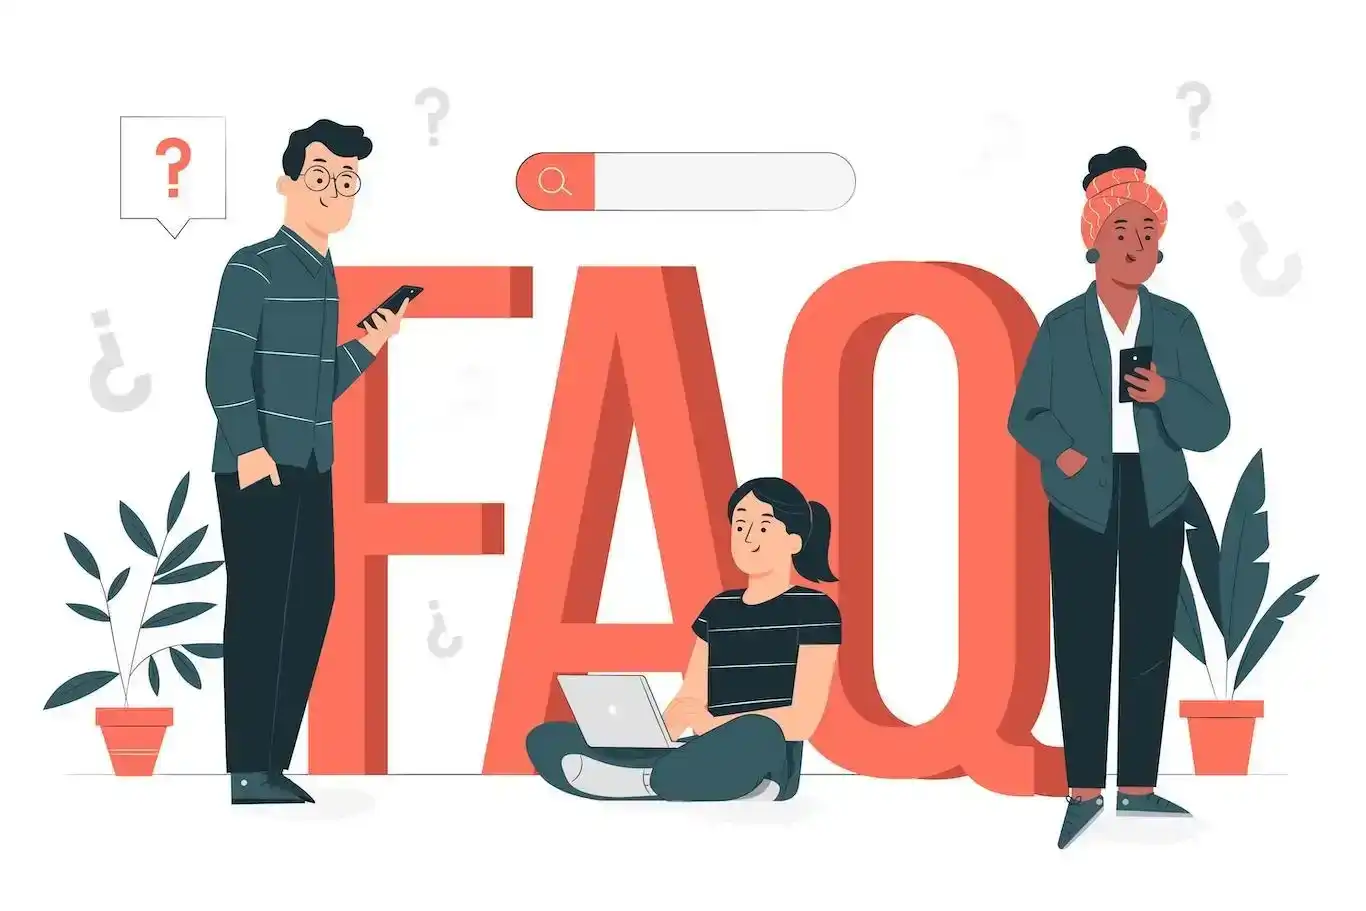 Illustration of the letters 'FAQ' in large, with three individuals searching for answers in their phones and laptop, symbolizing the modern reliance on digital FAQs for quick information.